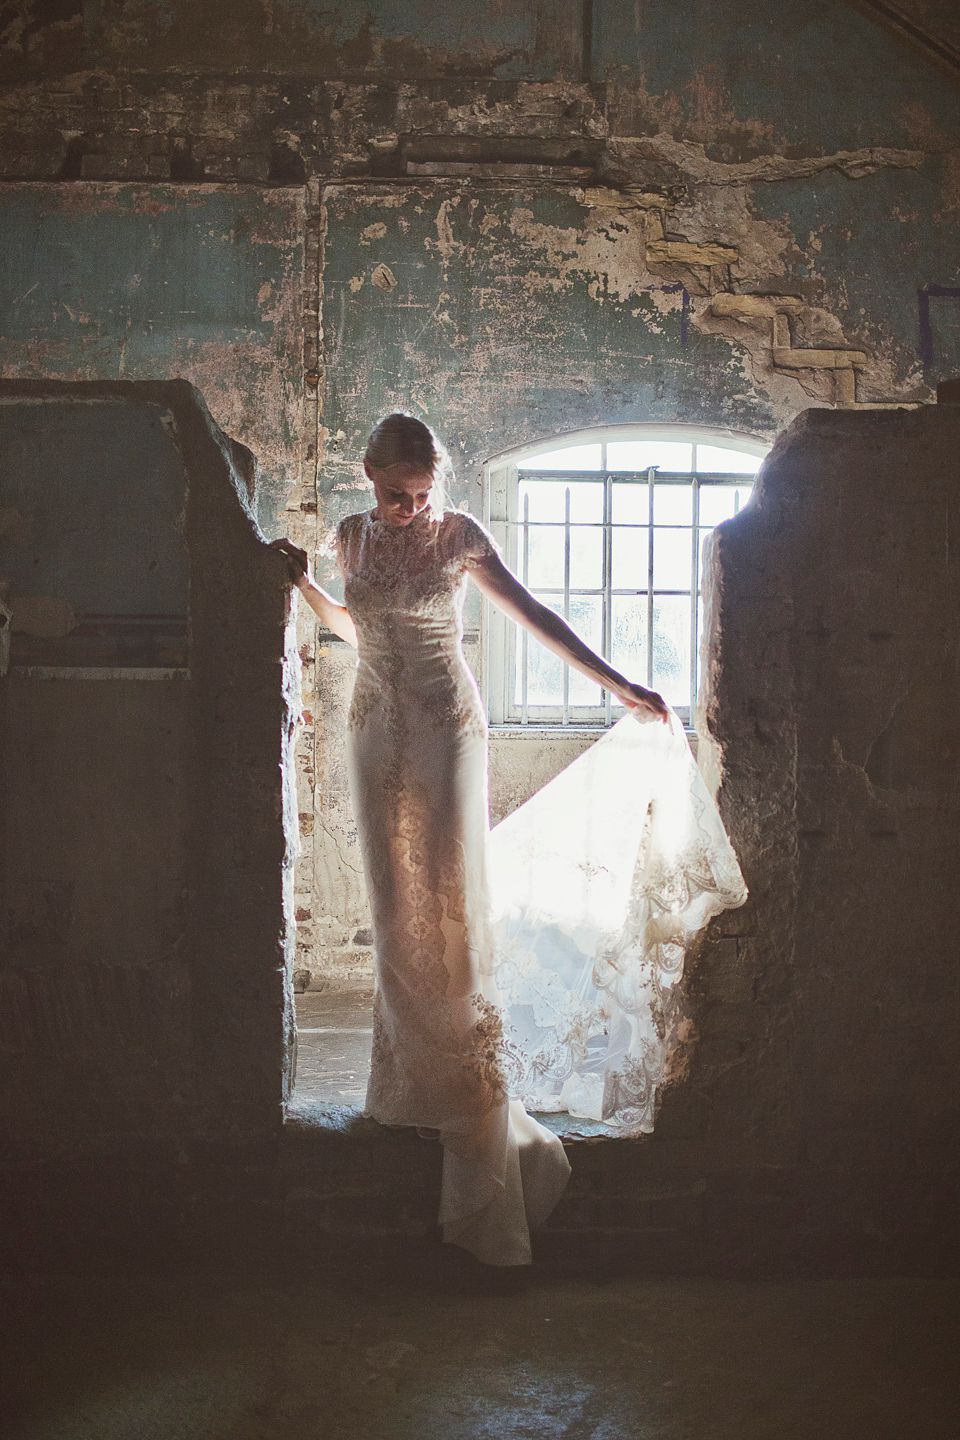 Irma wore a YolanCris gown for her cool, modern wedding at The Asylum in East London. Photography by On Love and Photography.